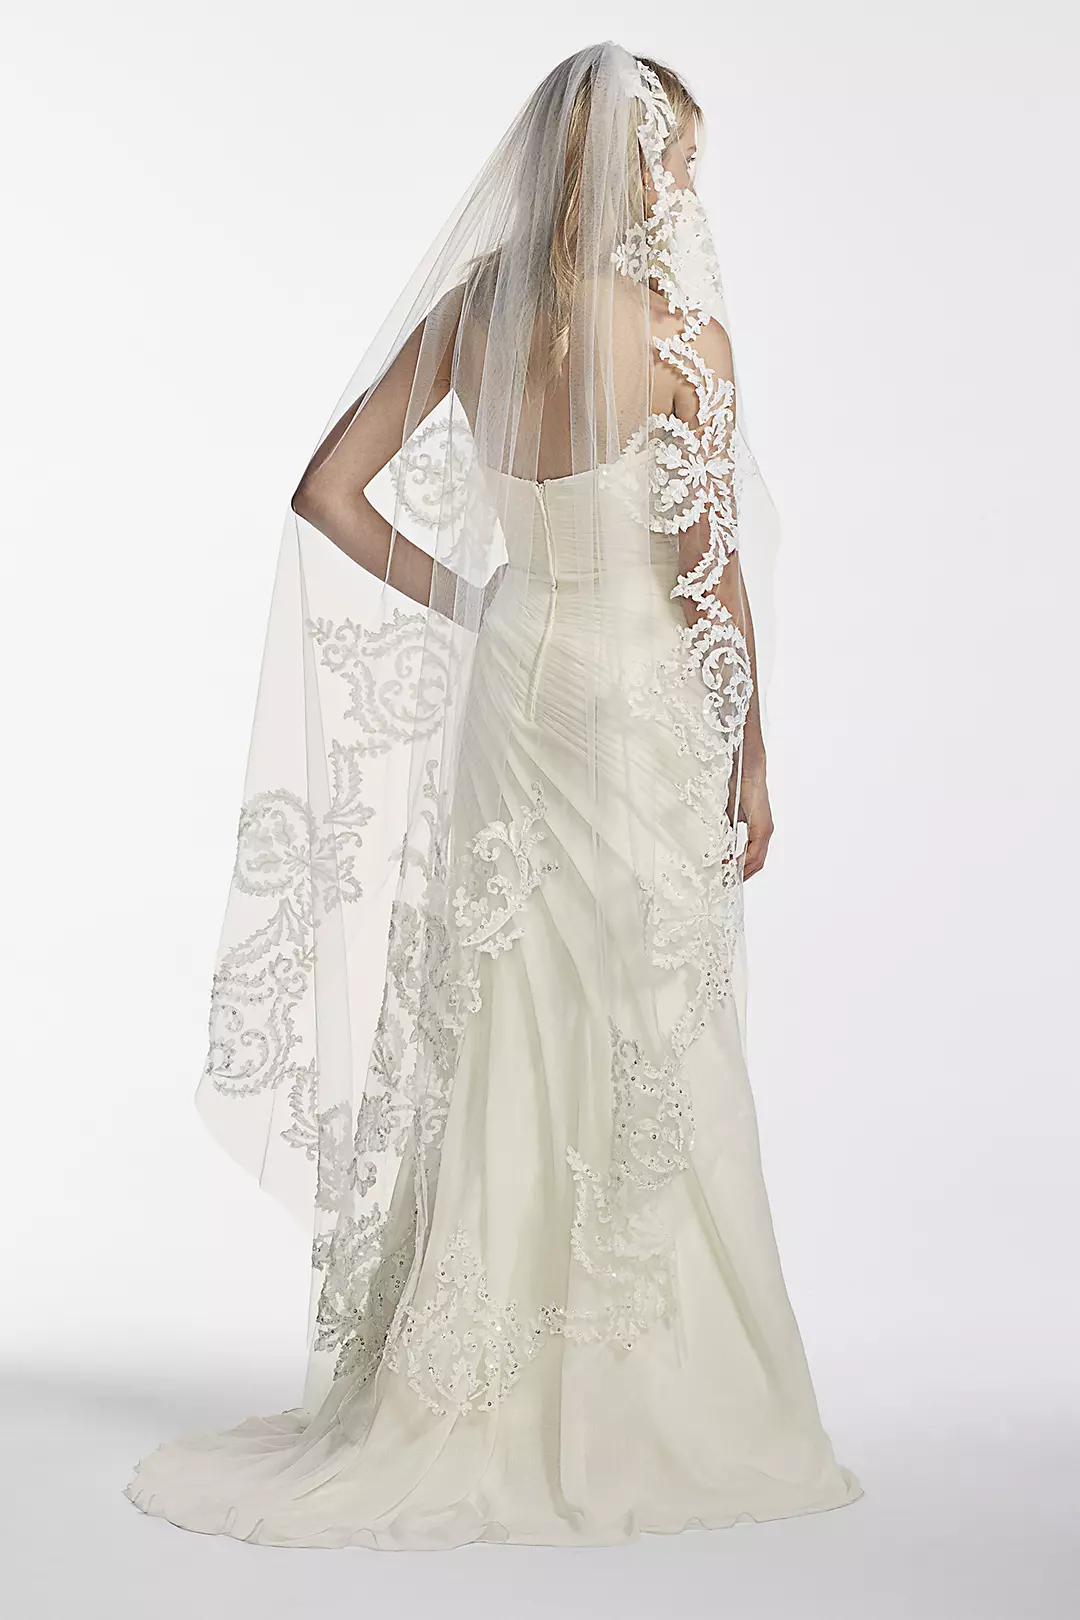 One Tier Mid Length Veil with Applique Scroll Work Image